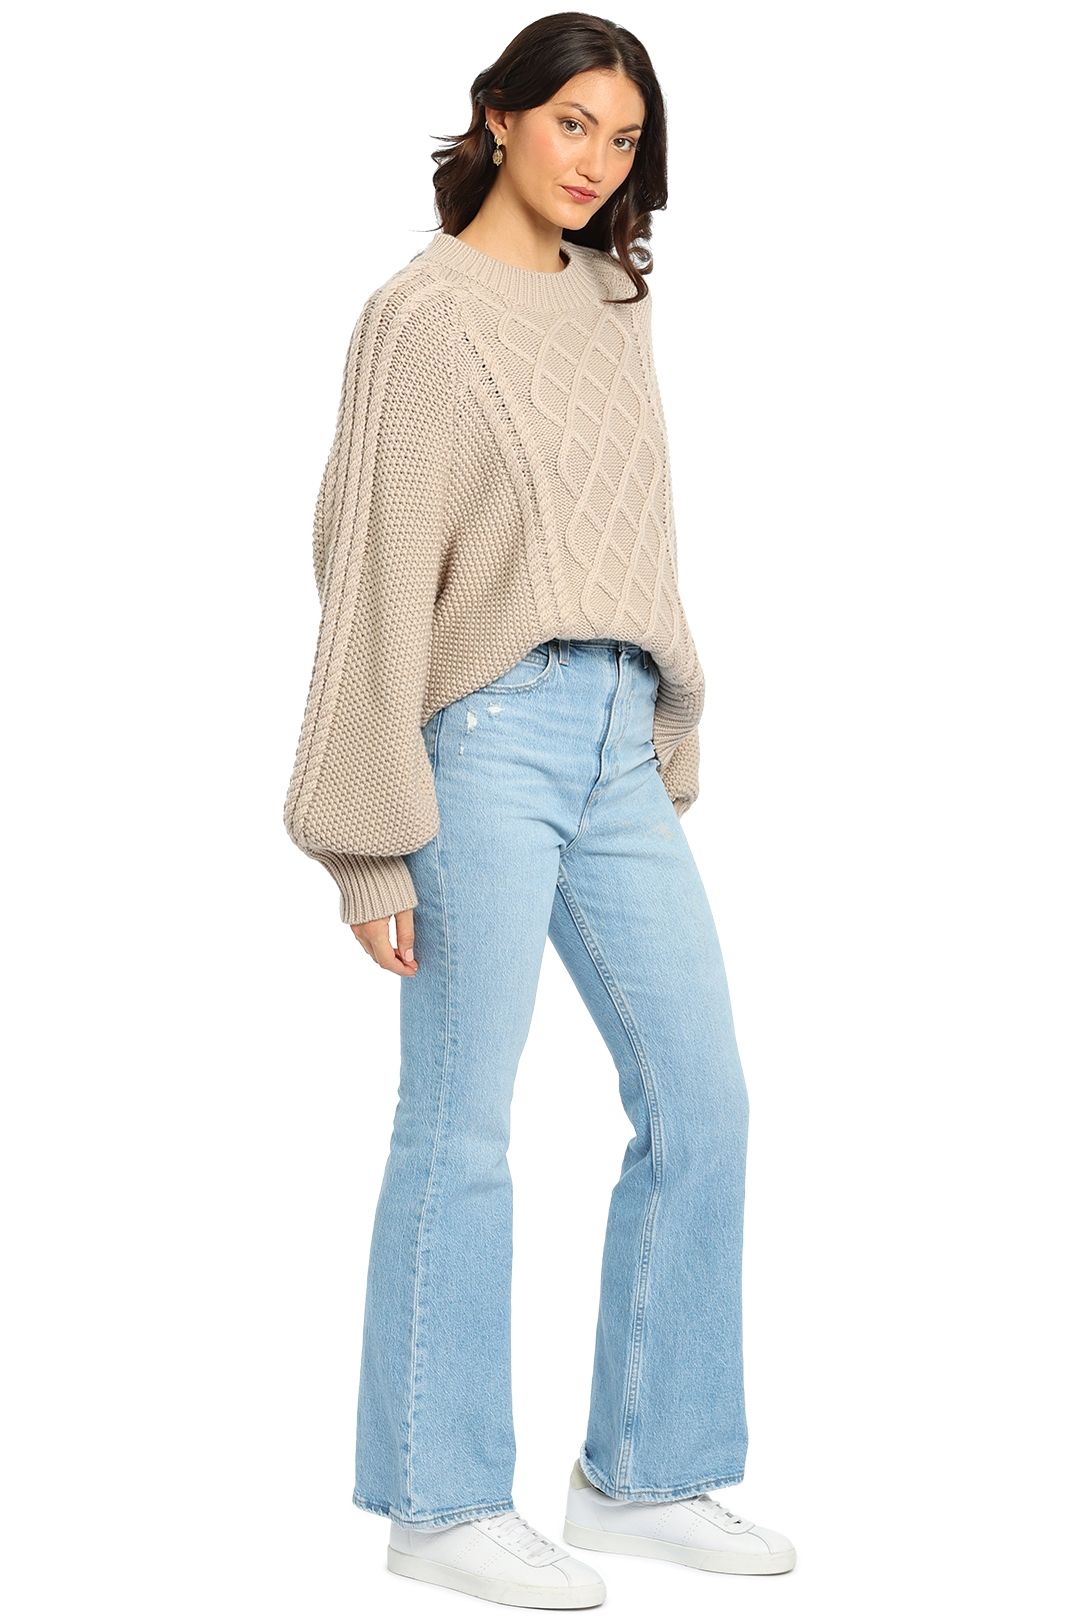 Ena Pelly Marnie Cabel Knit Long Sleeve